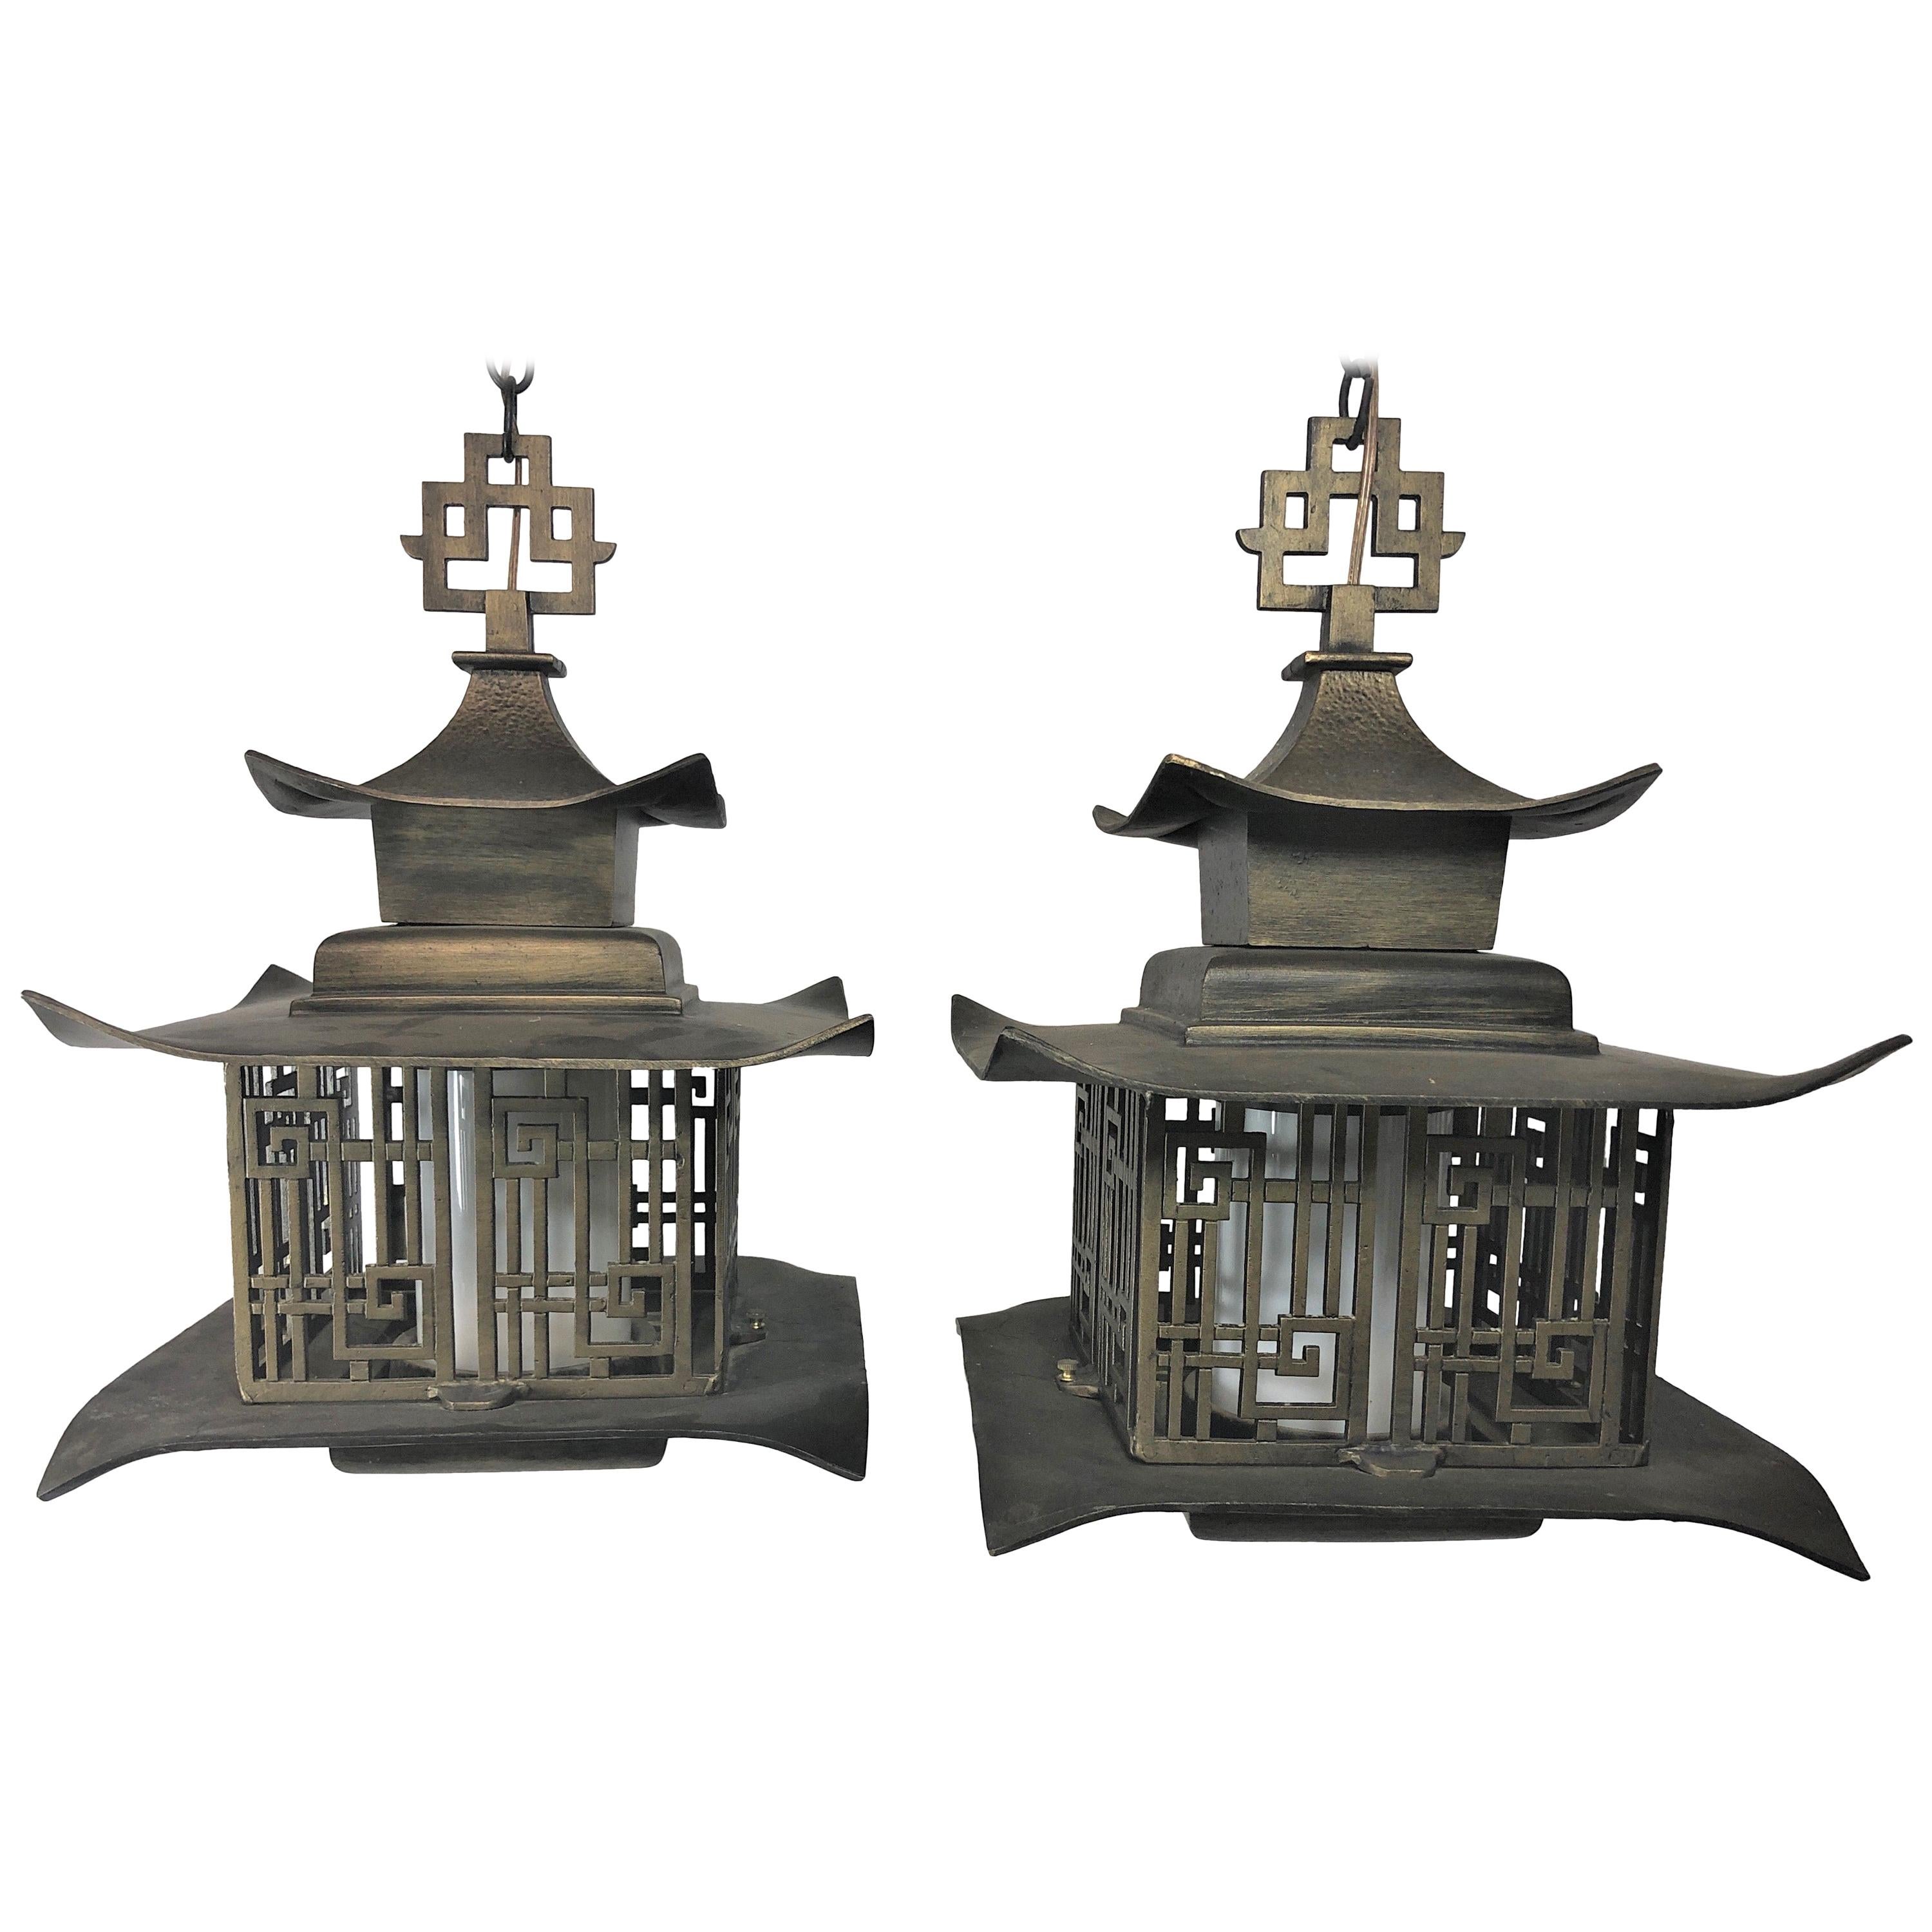 Pair of Vintage 1960s Chinese Pagoda Lantern Chandeliers